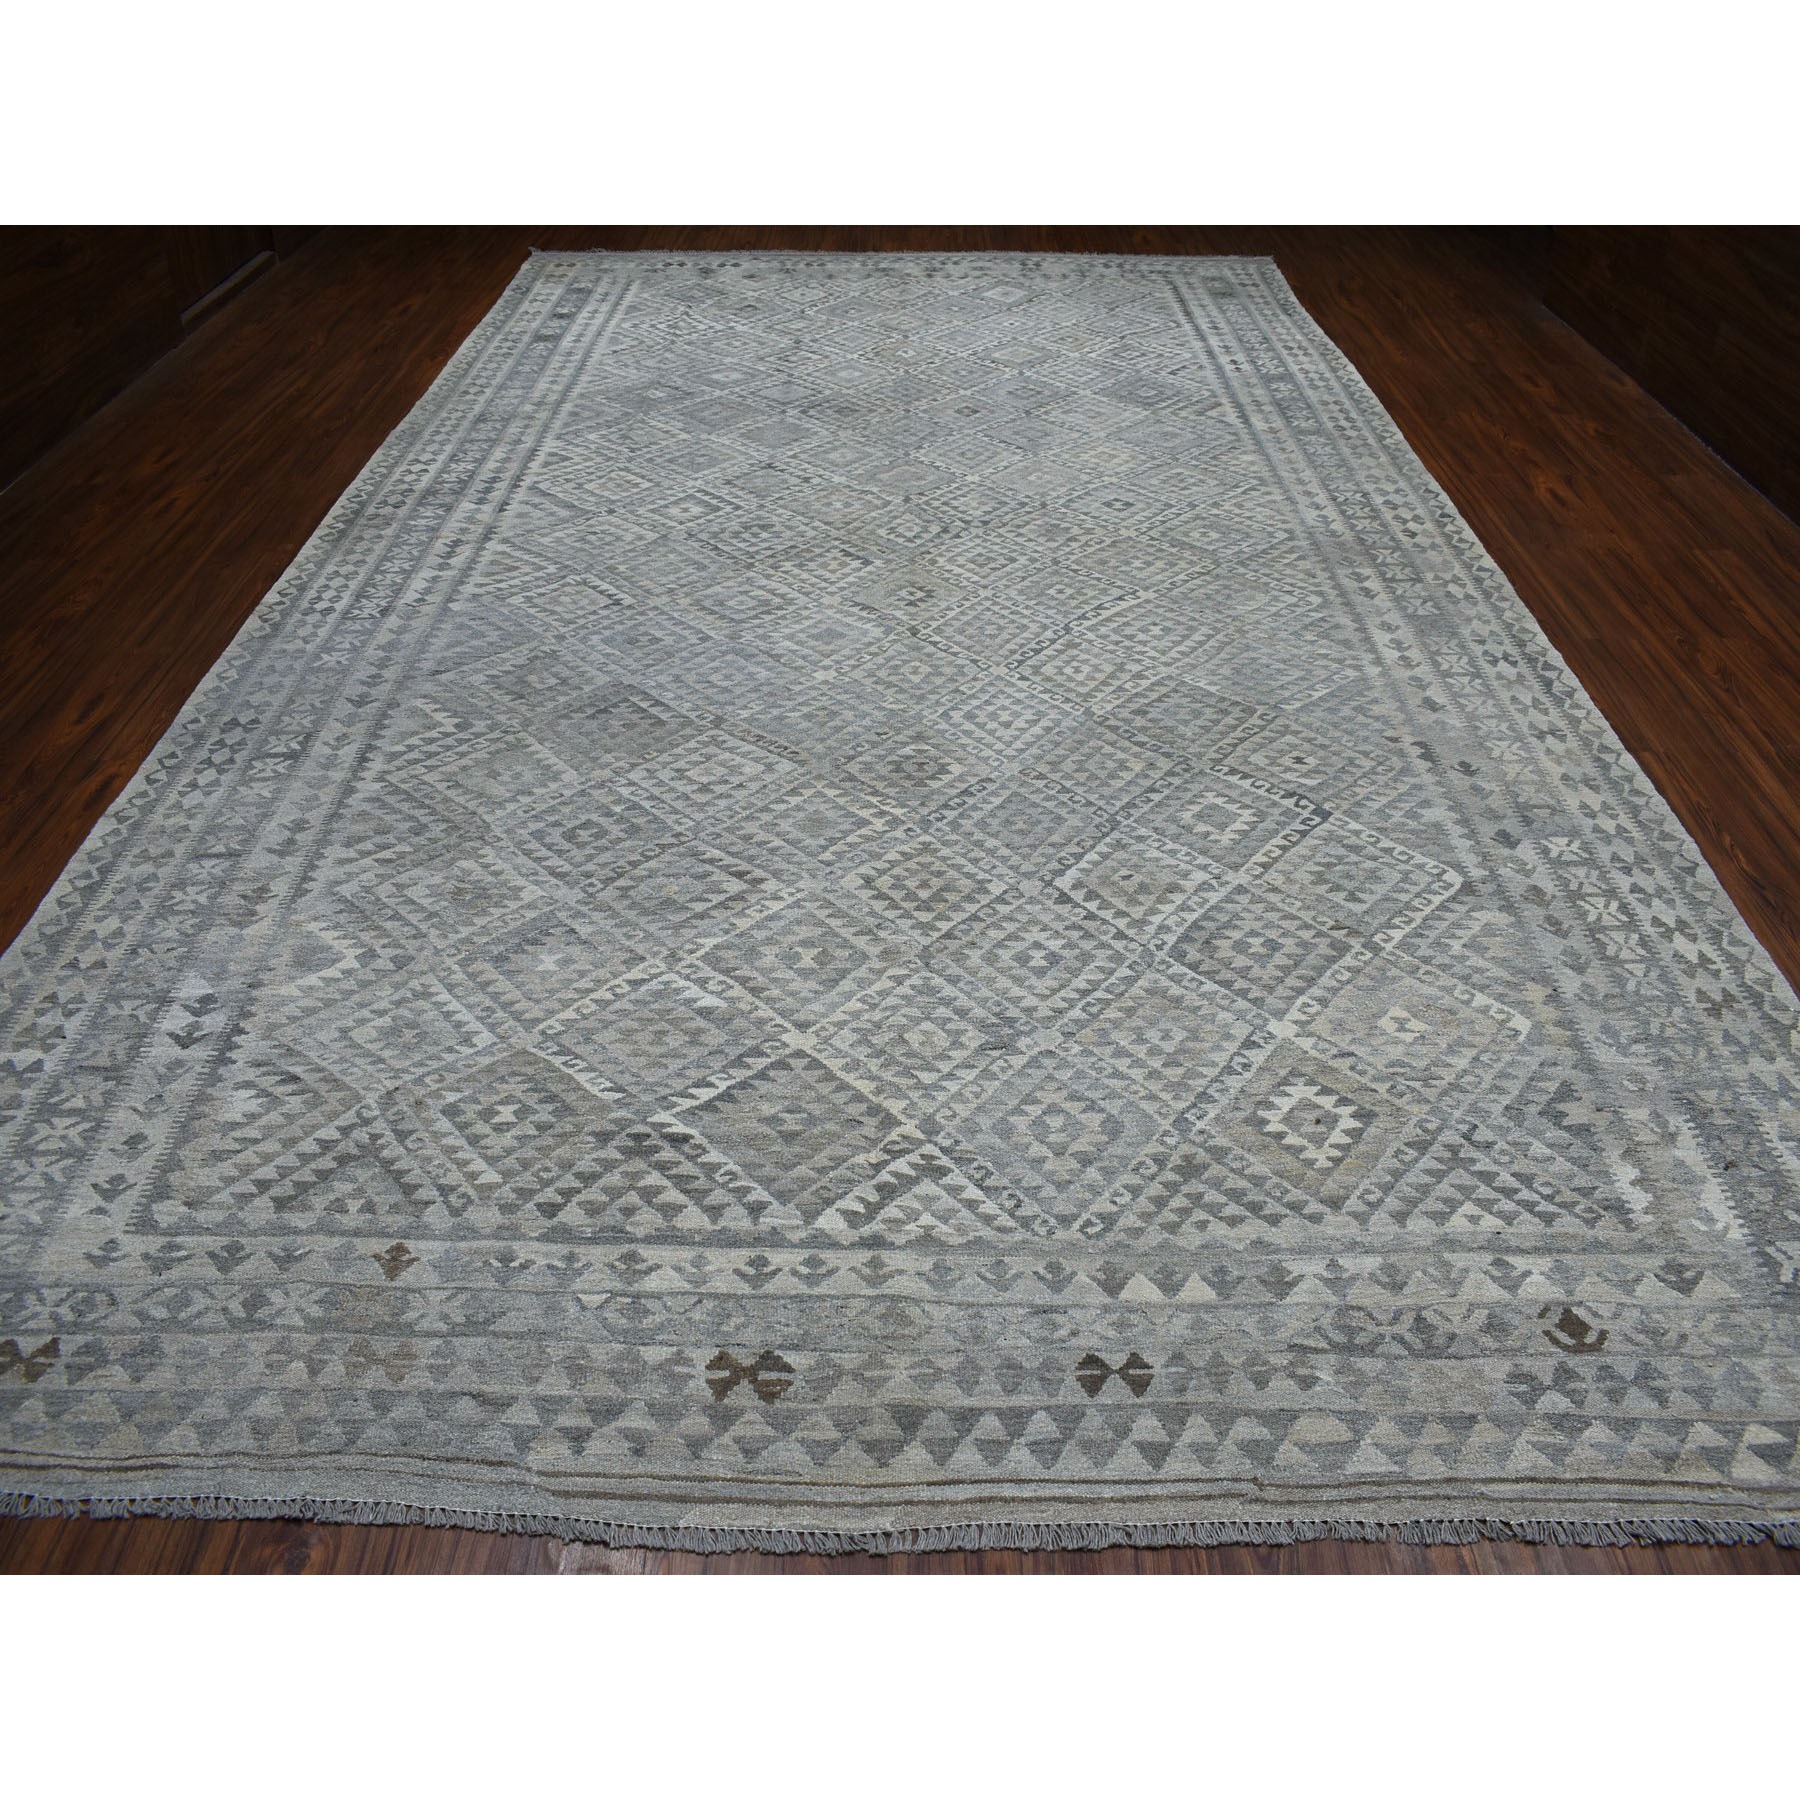 9-9 x16-4  Oversized Undyed Natural Wool Afghan Kilim Reversible Hand Woven Rug 